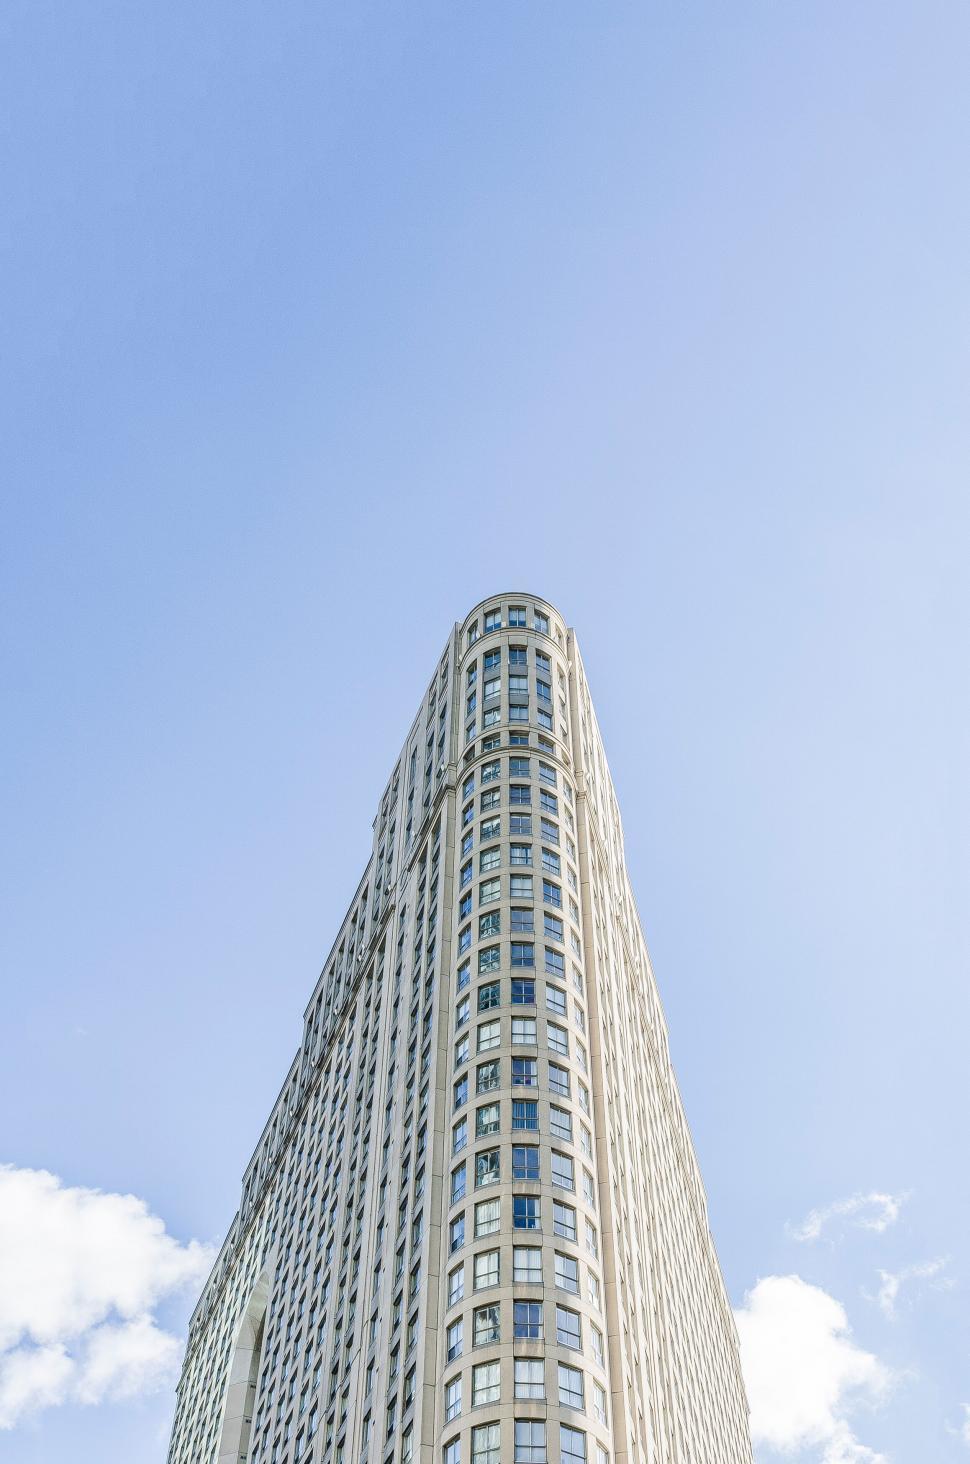 Free Image of Skyscraper against blue sky with clouds 